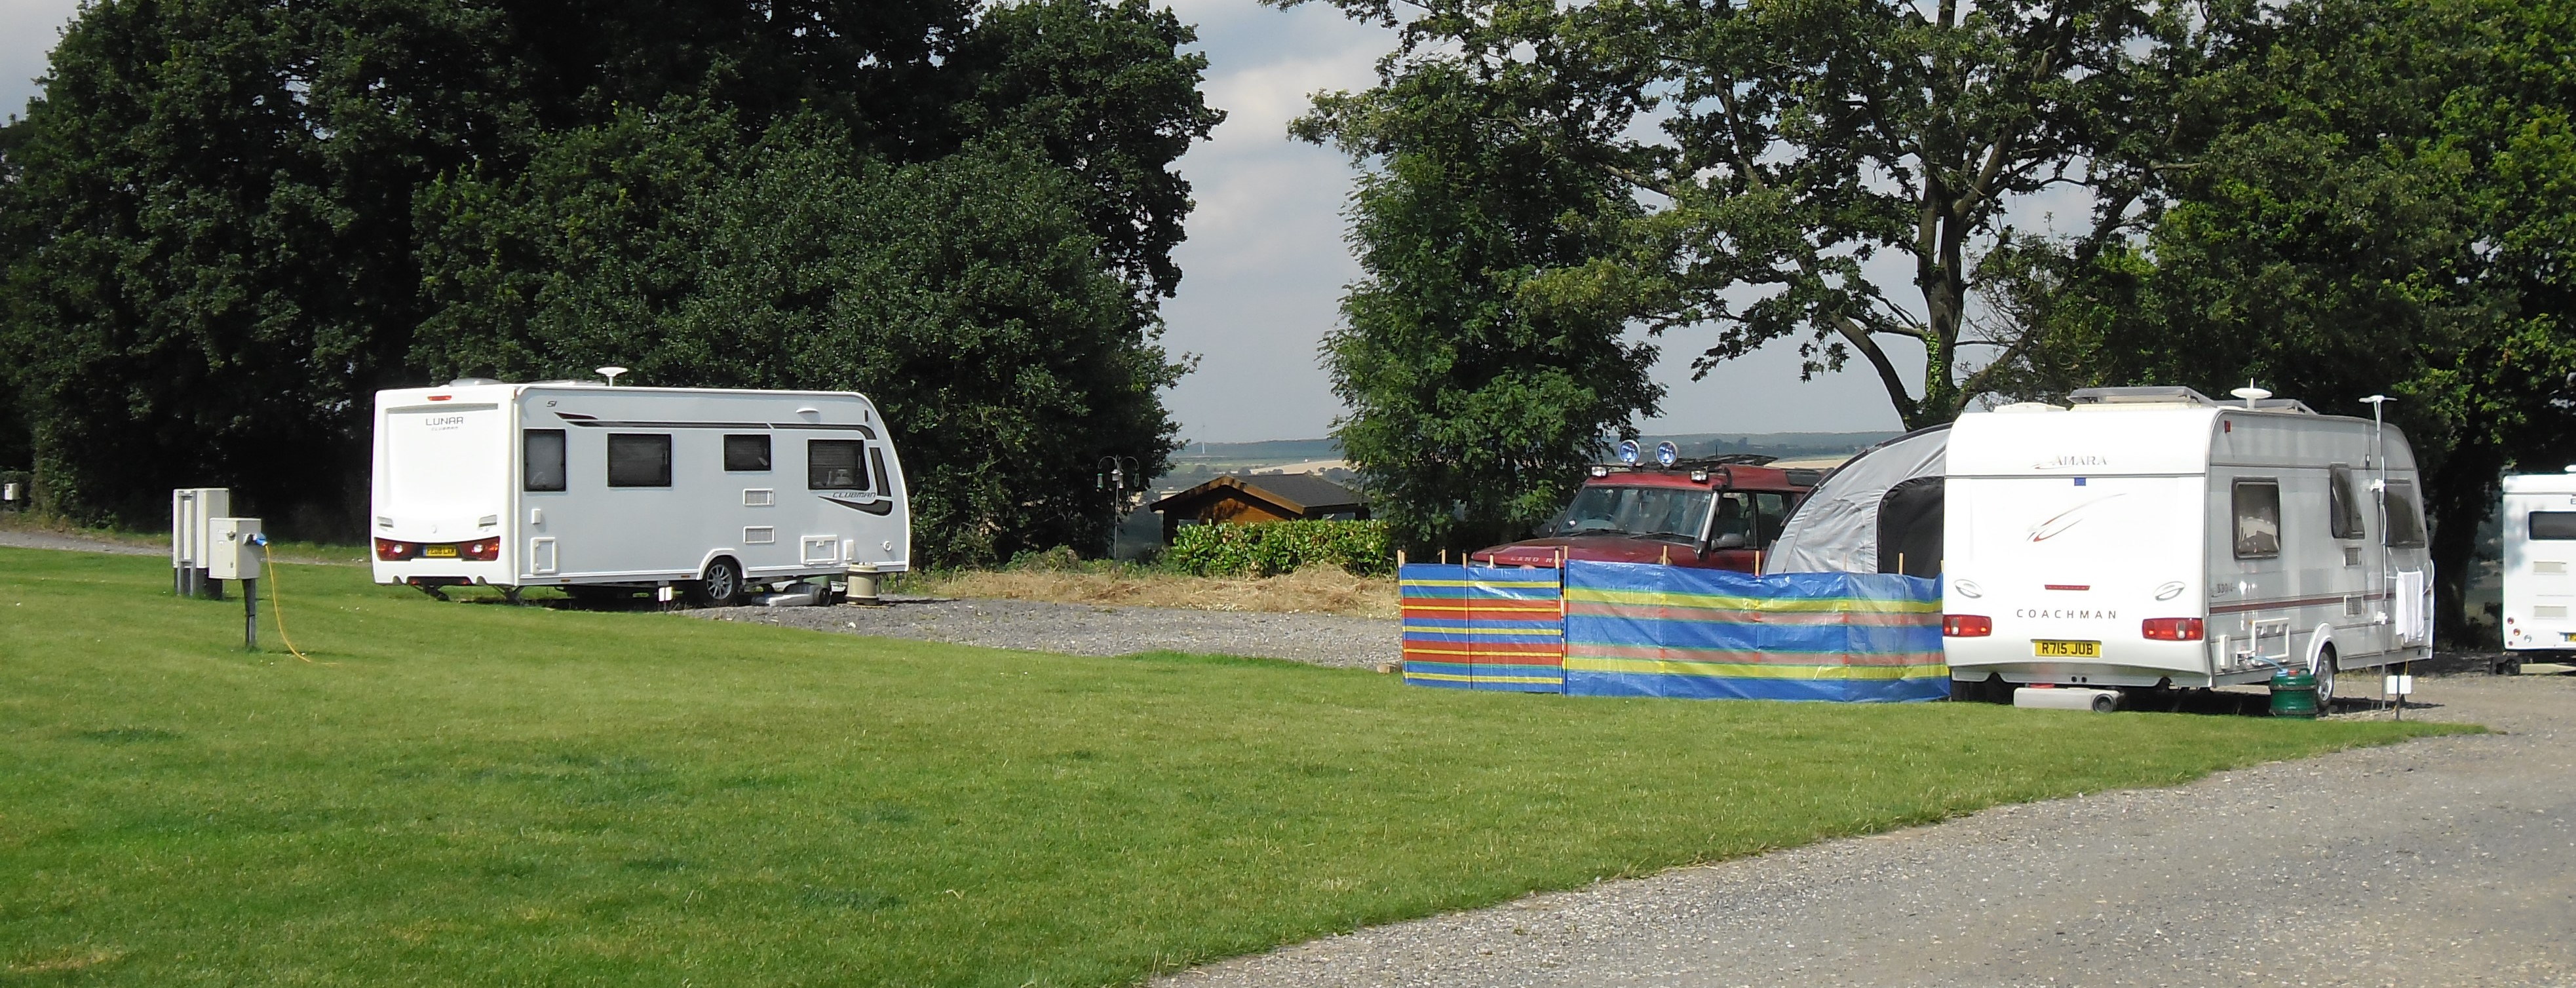 New Hall Farm Caravan and Camping Site